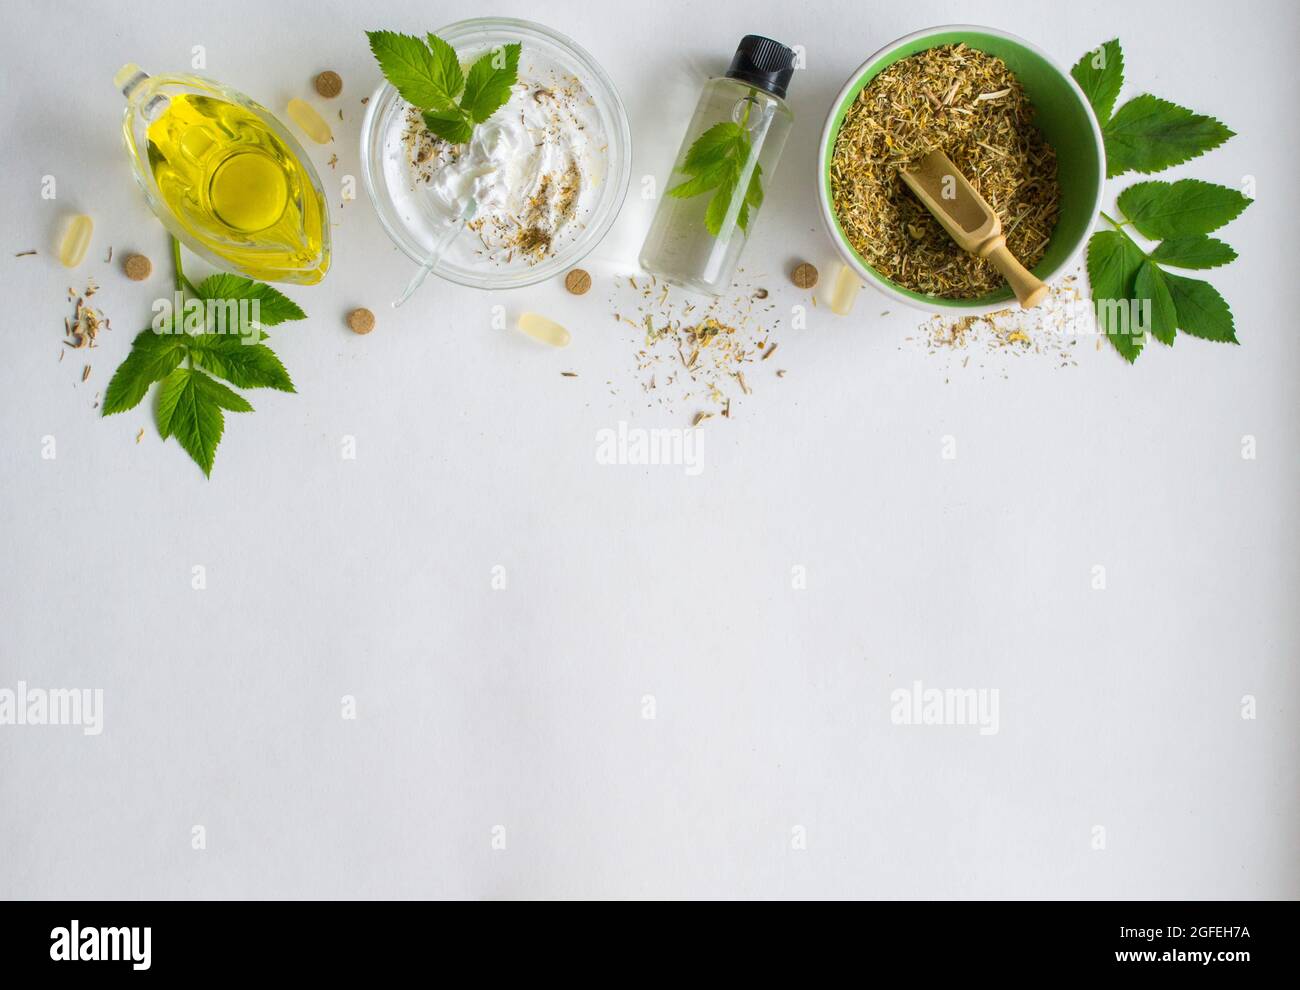 Alternative medicine, herbal extract: white background, jar of oil over a bowl with white essence. Bowl with ground dry medicinal herbs, green leaves Stock Photo